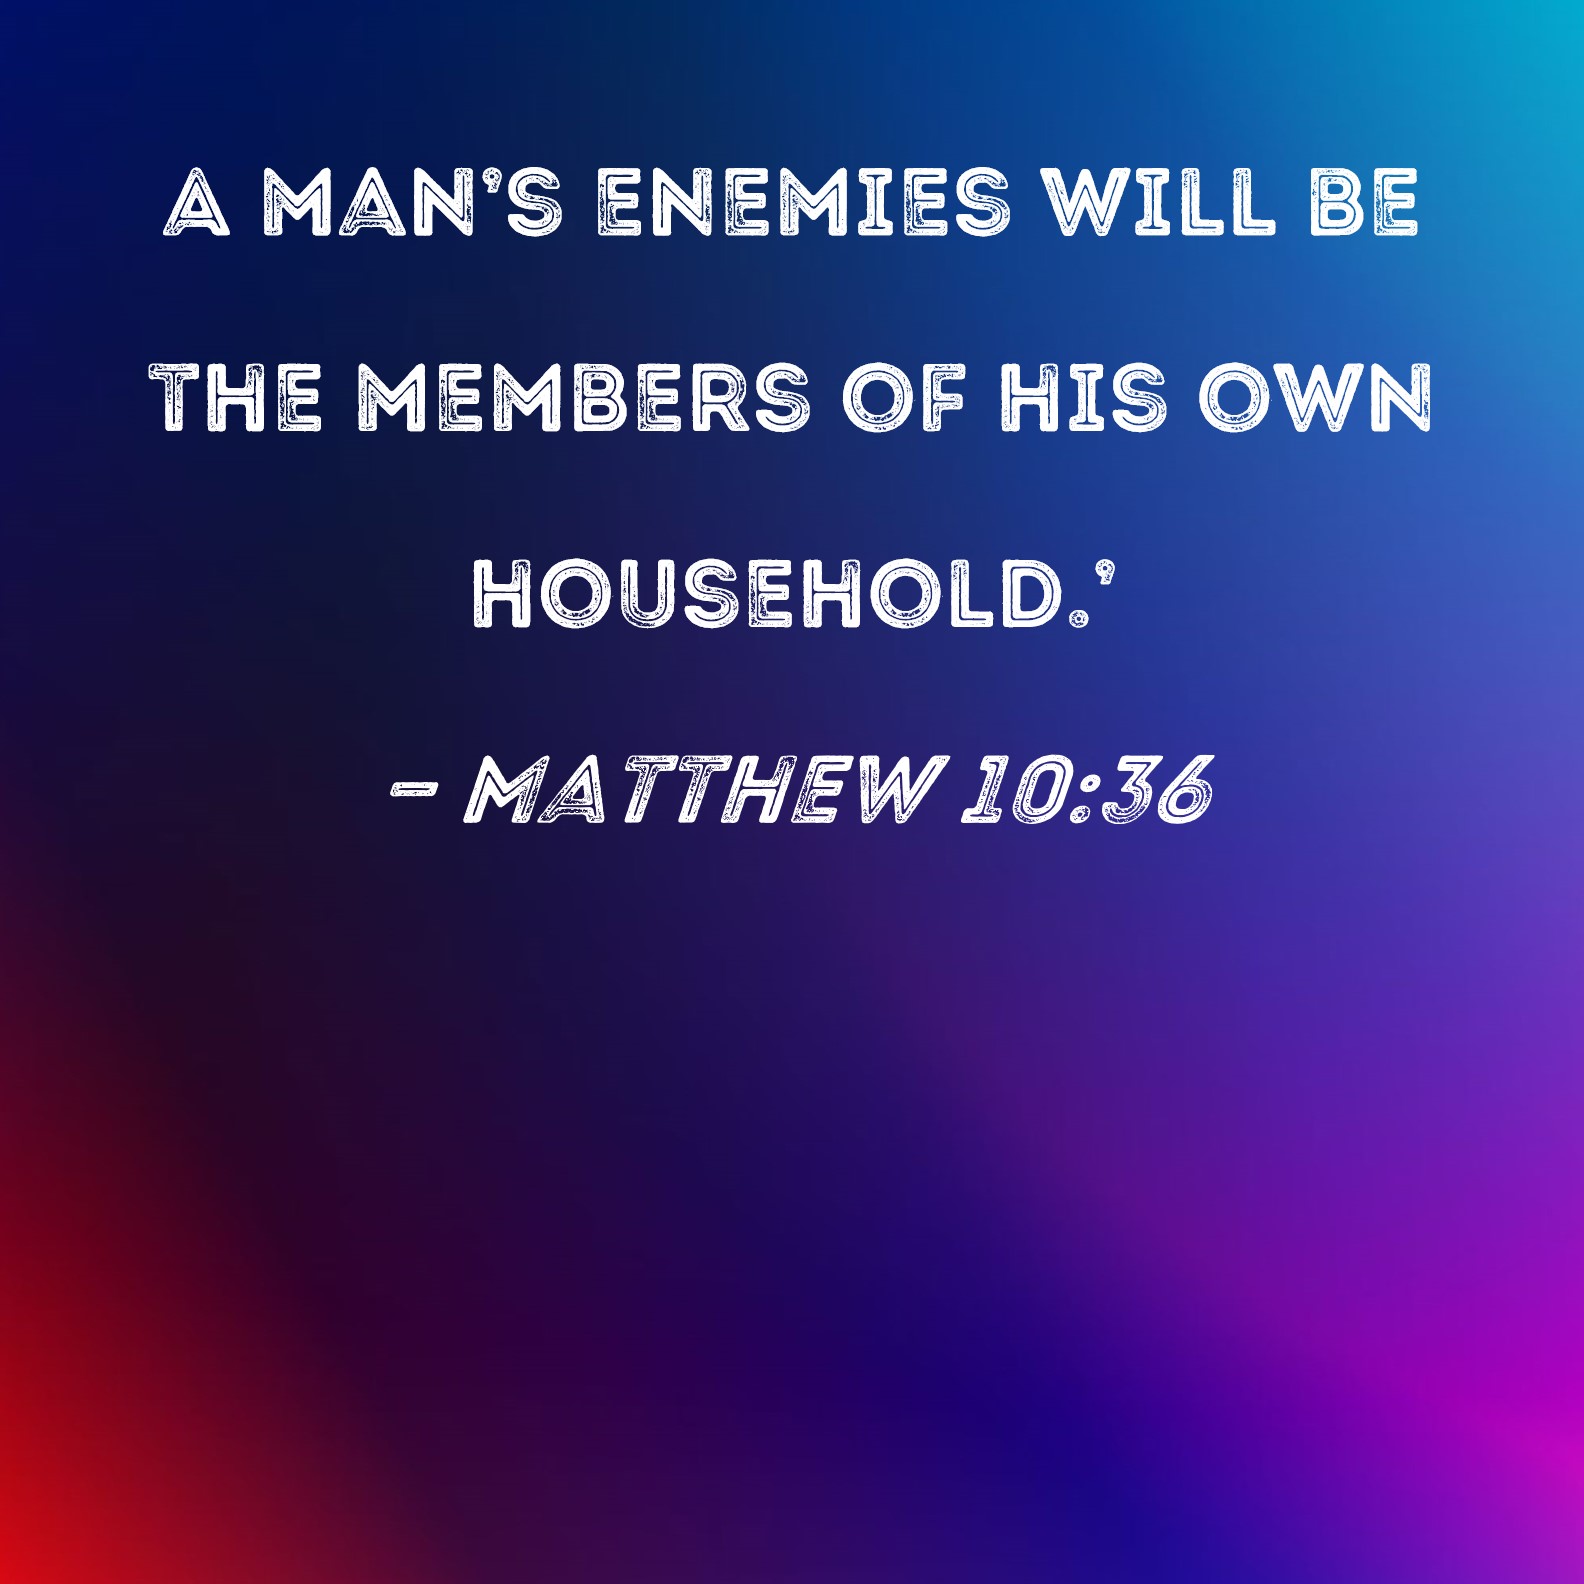 Matthew 10:36 A man's enemies will be the members of his own household.